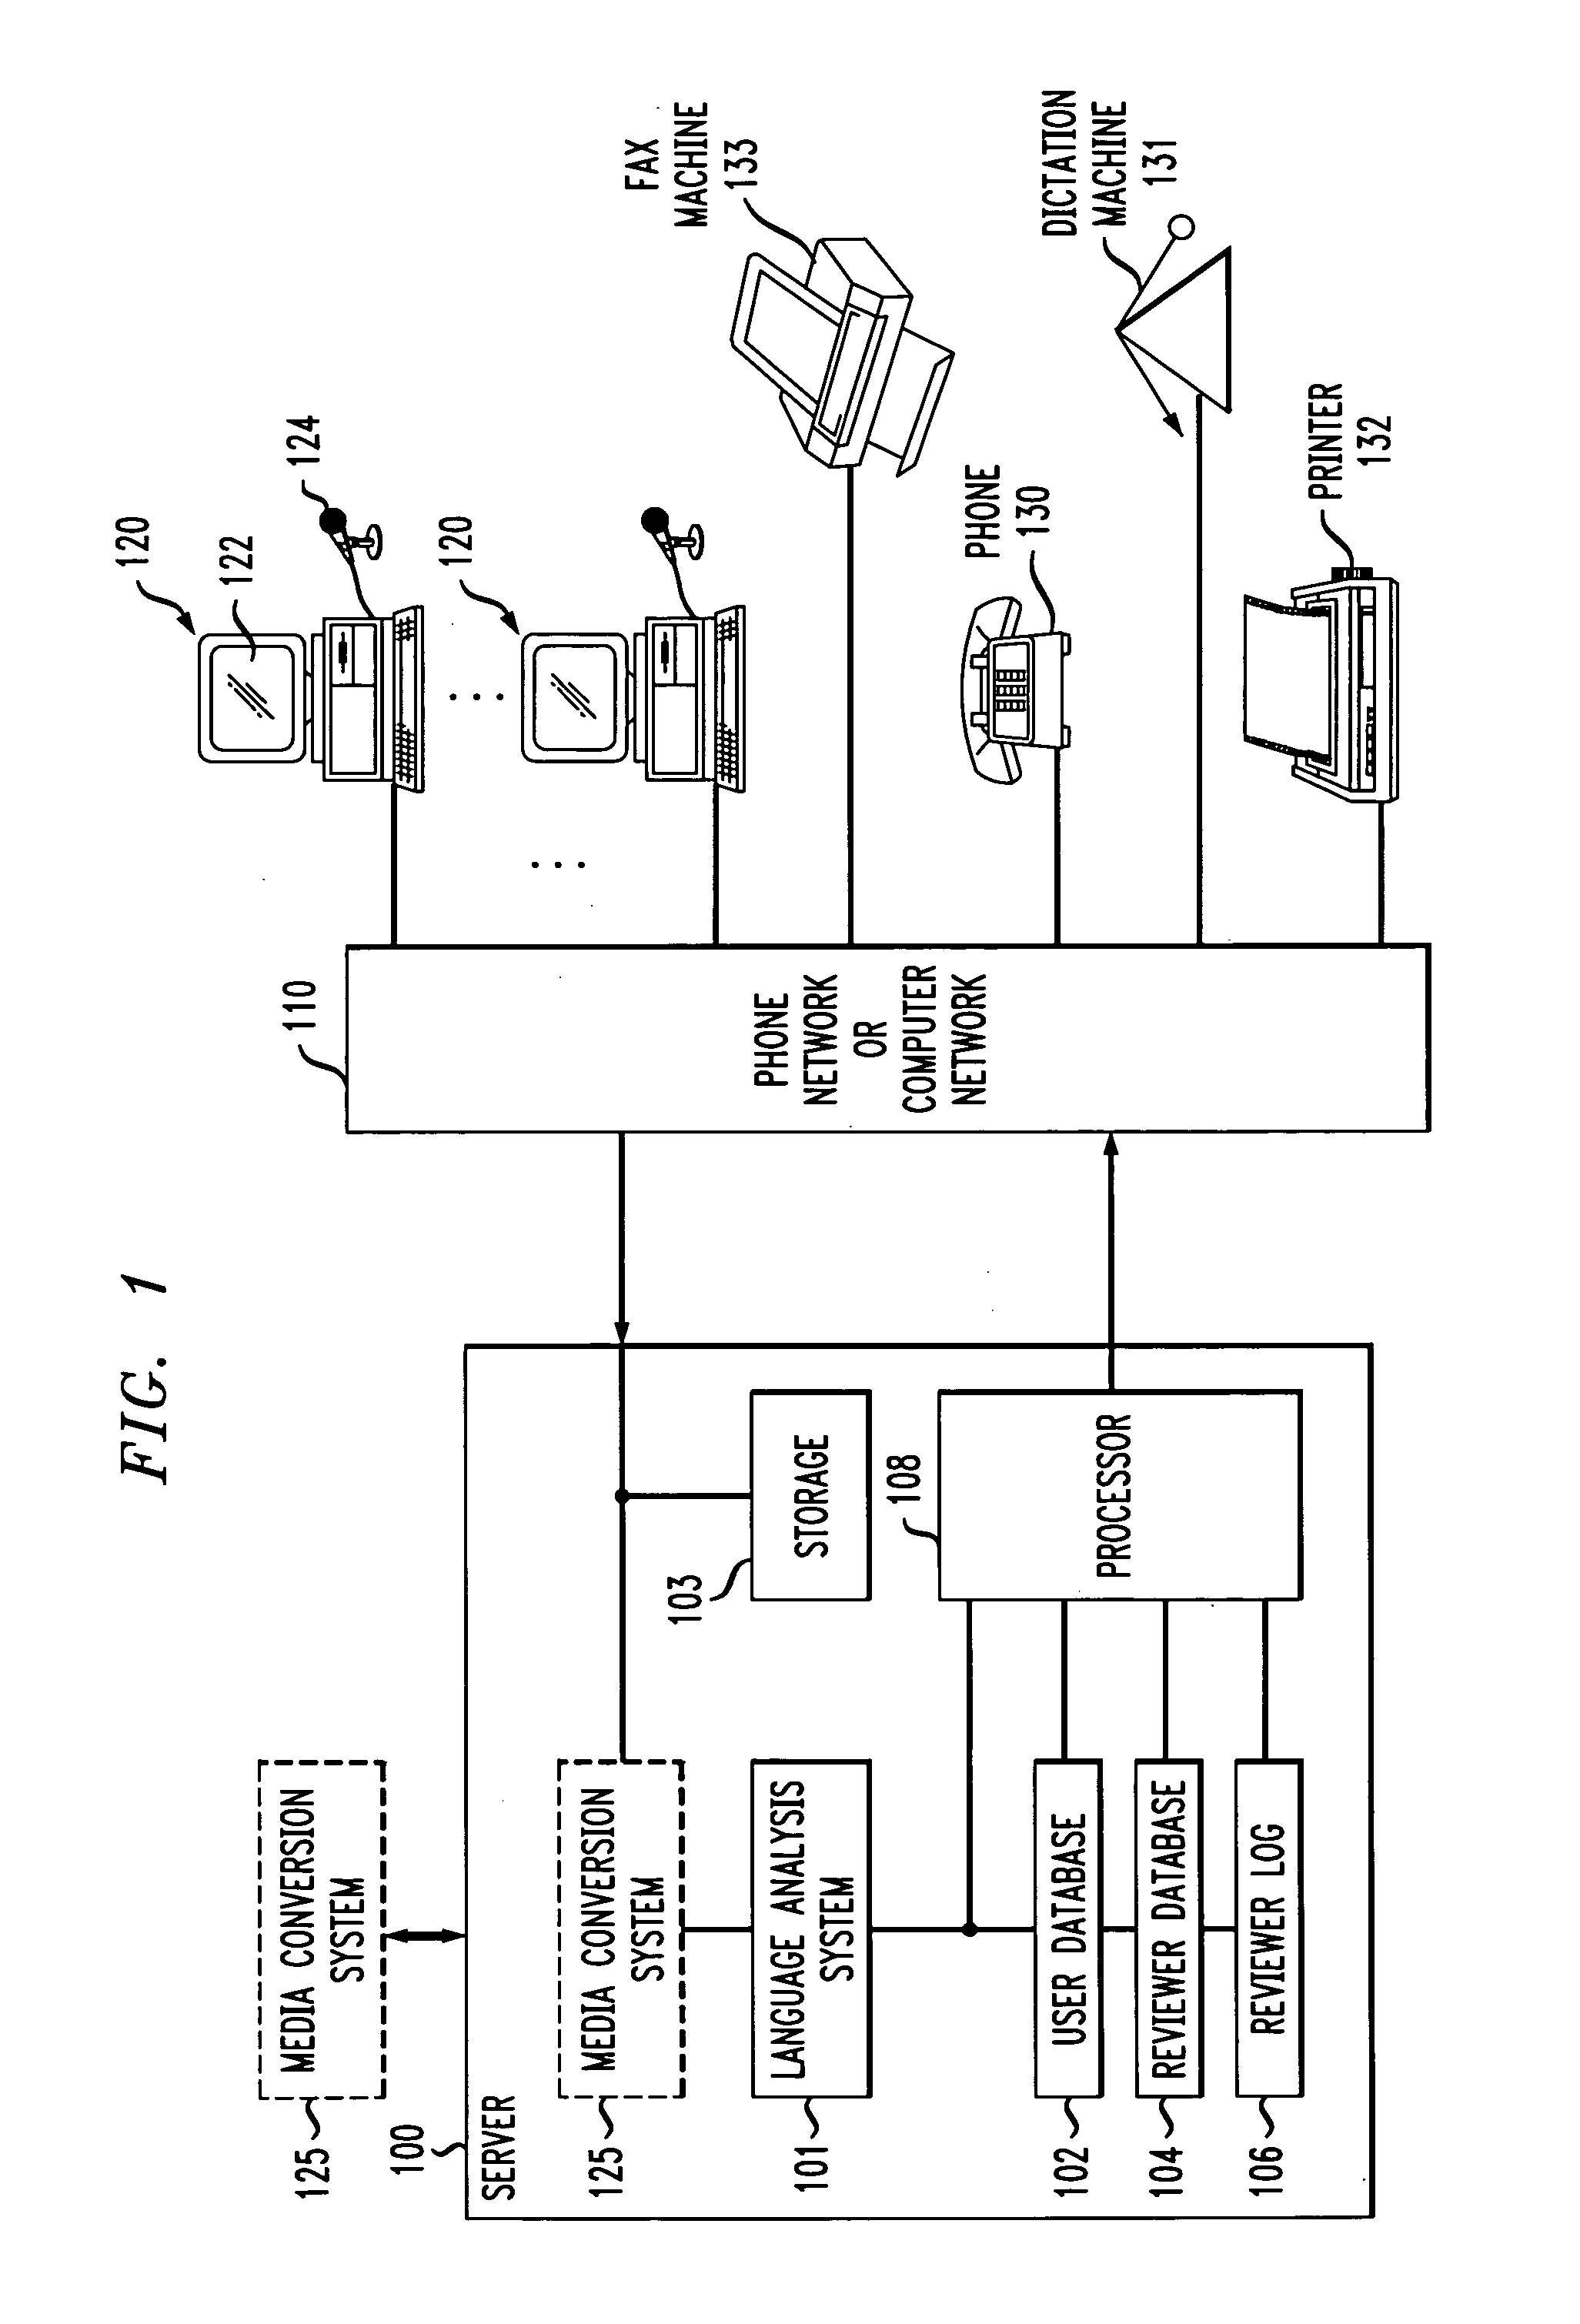 Method of and apparatus for improving productivity of human reviewers of automatically transcribed documents generated by media conversion systems